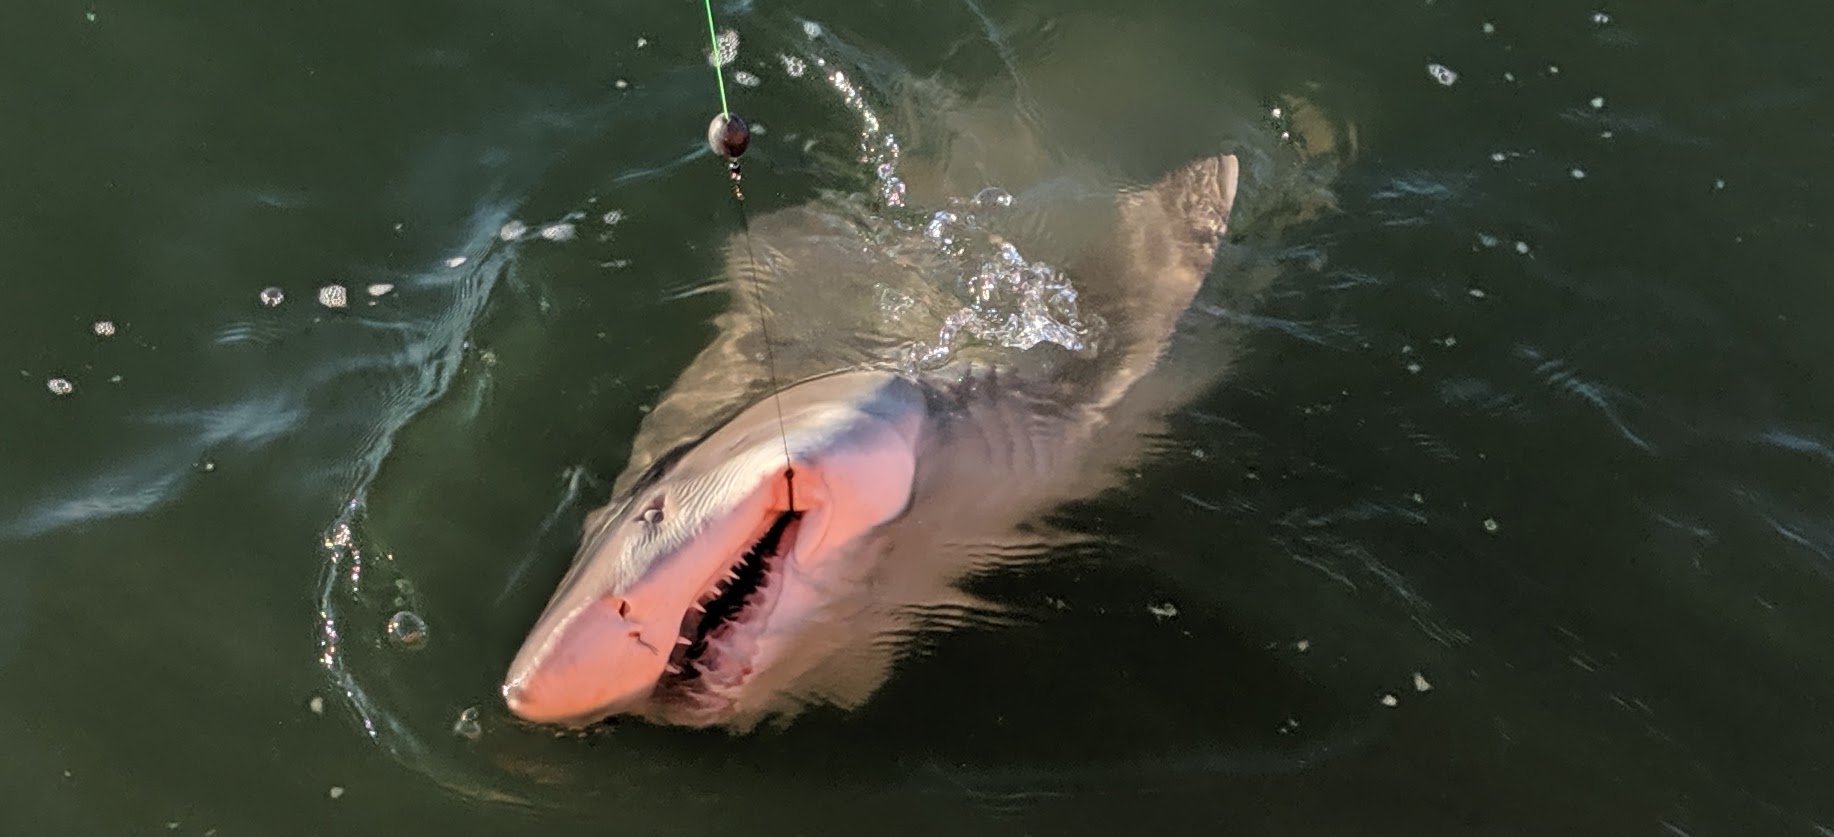 Will Land-Based Shark Fishing Be Outlawed Entirely?